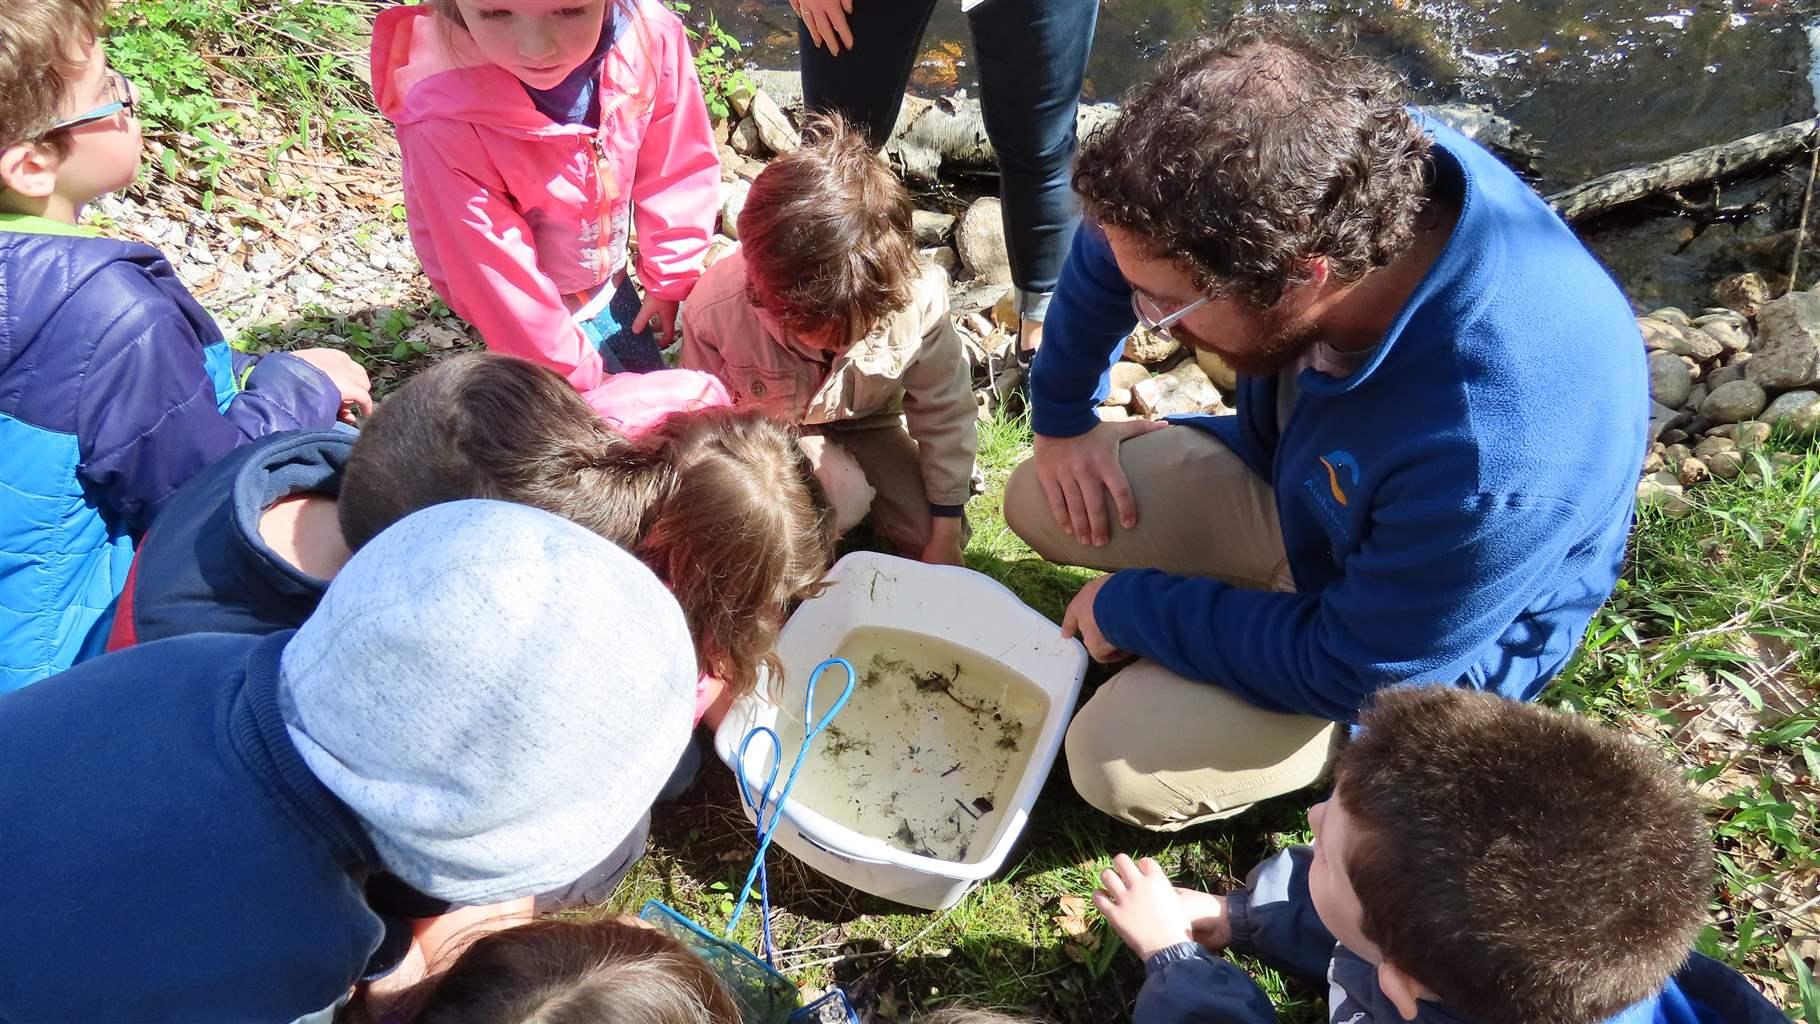 Joe Attwater, a teacher and naturalist with the Roger Tory Peterson Estuary Center in Old Lyme, Connecticut, works with children at the Jewett Preserve, in nearby Lyme. 